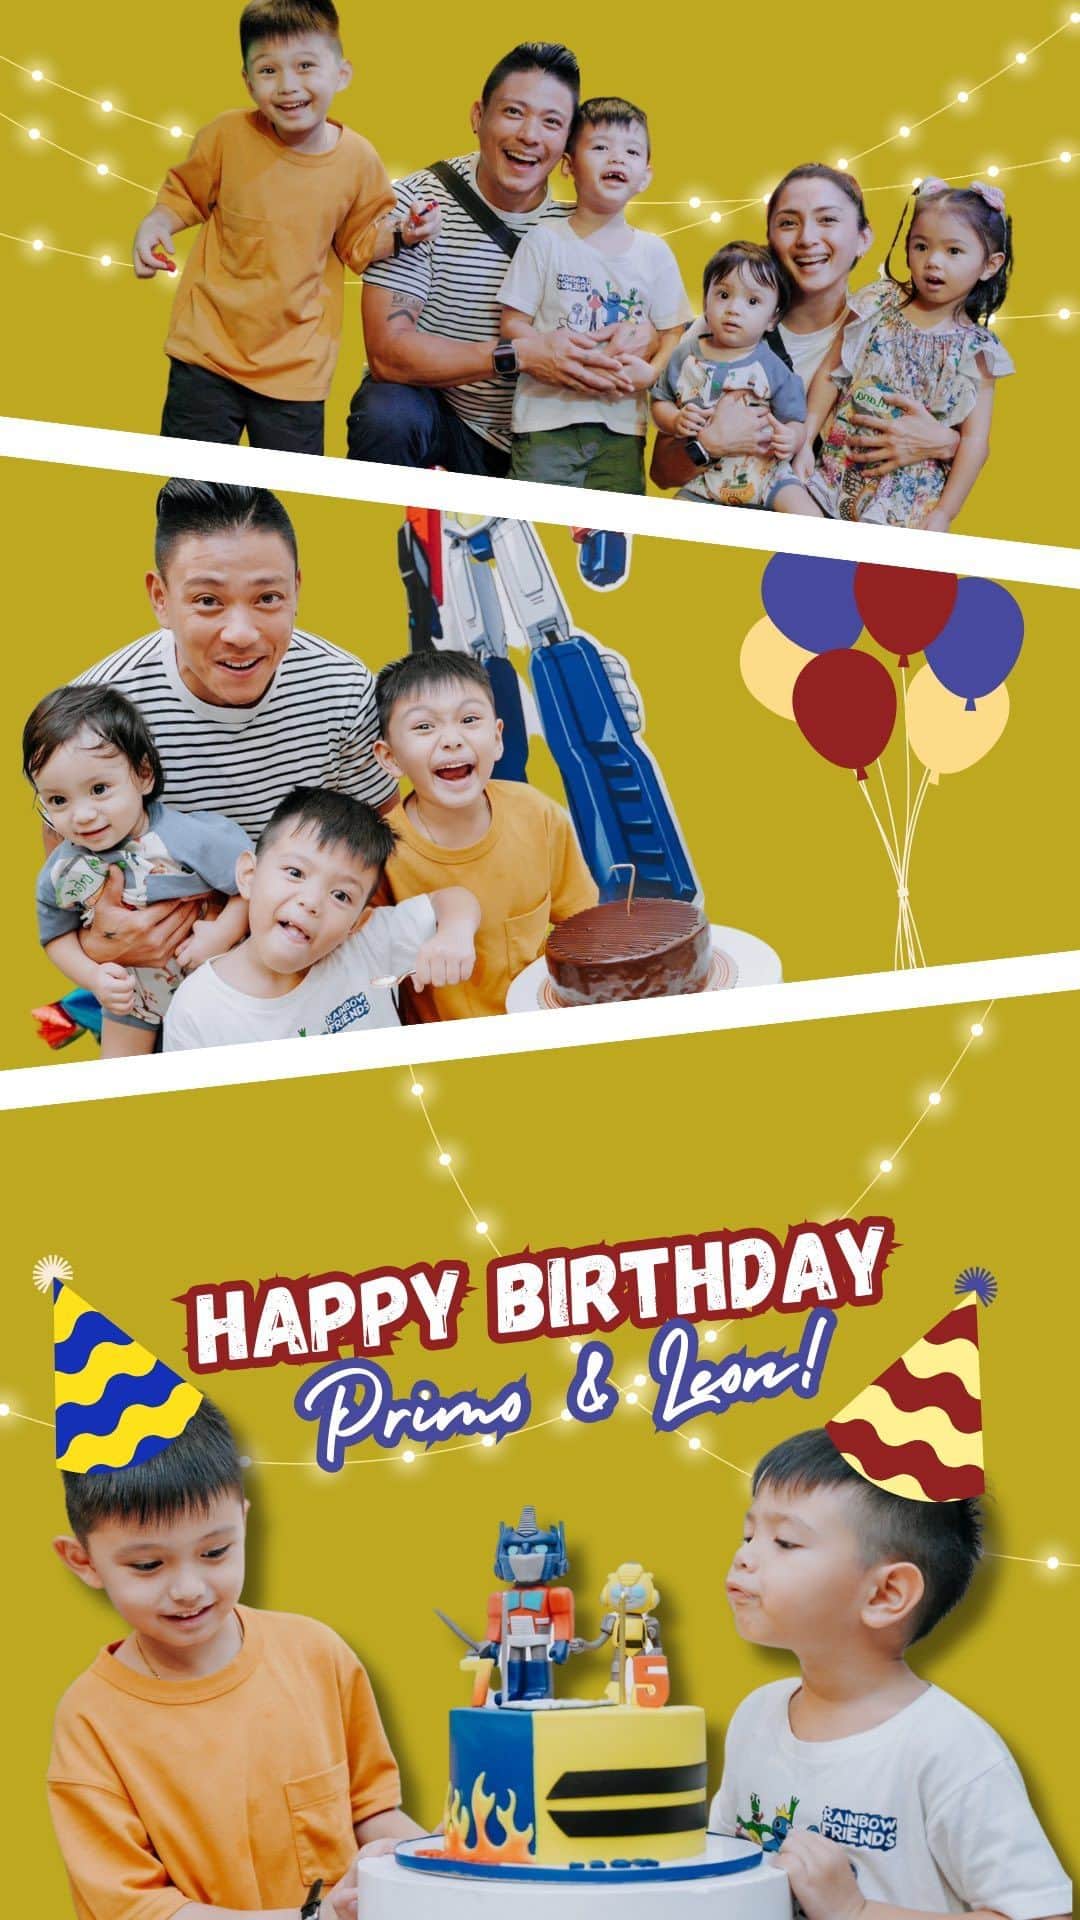 Iya Villaniaのインスタグラム：「Happiest birthday to my dearest Primo & Leon!! 💕   It’s been so amazing watching you both TRANSFORM 😂 into the sweetest Kuya’s you are today towards Duday & Astro. 🥹 Literally the best kiddos with the biggest hearts of gold!!   Love you guys forever!! 🫶🏼」